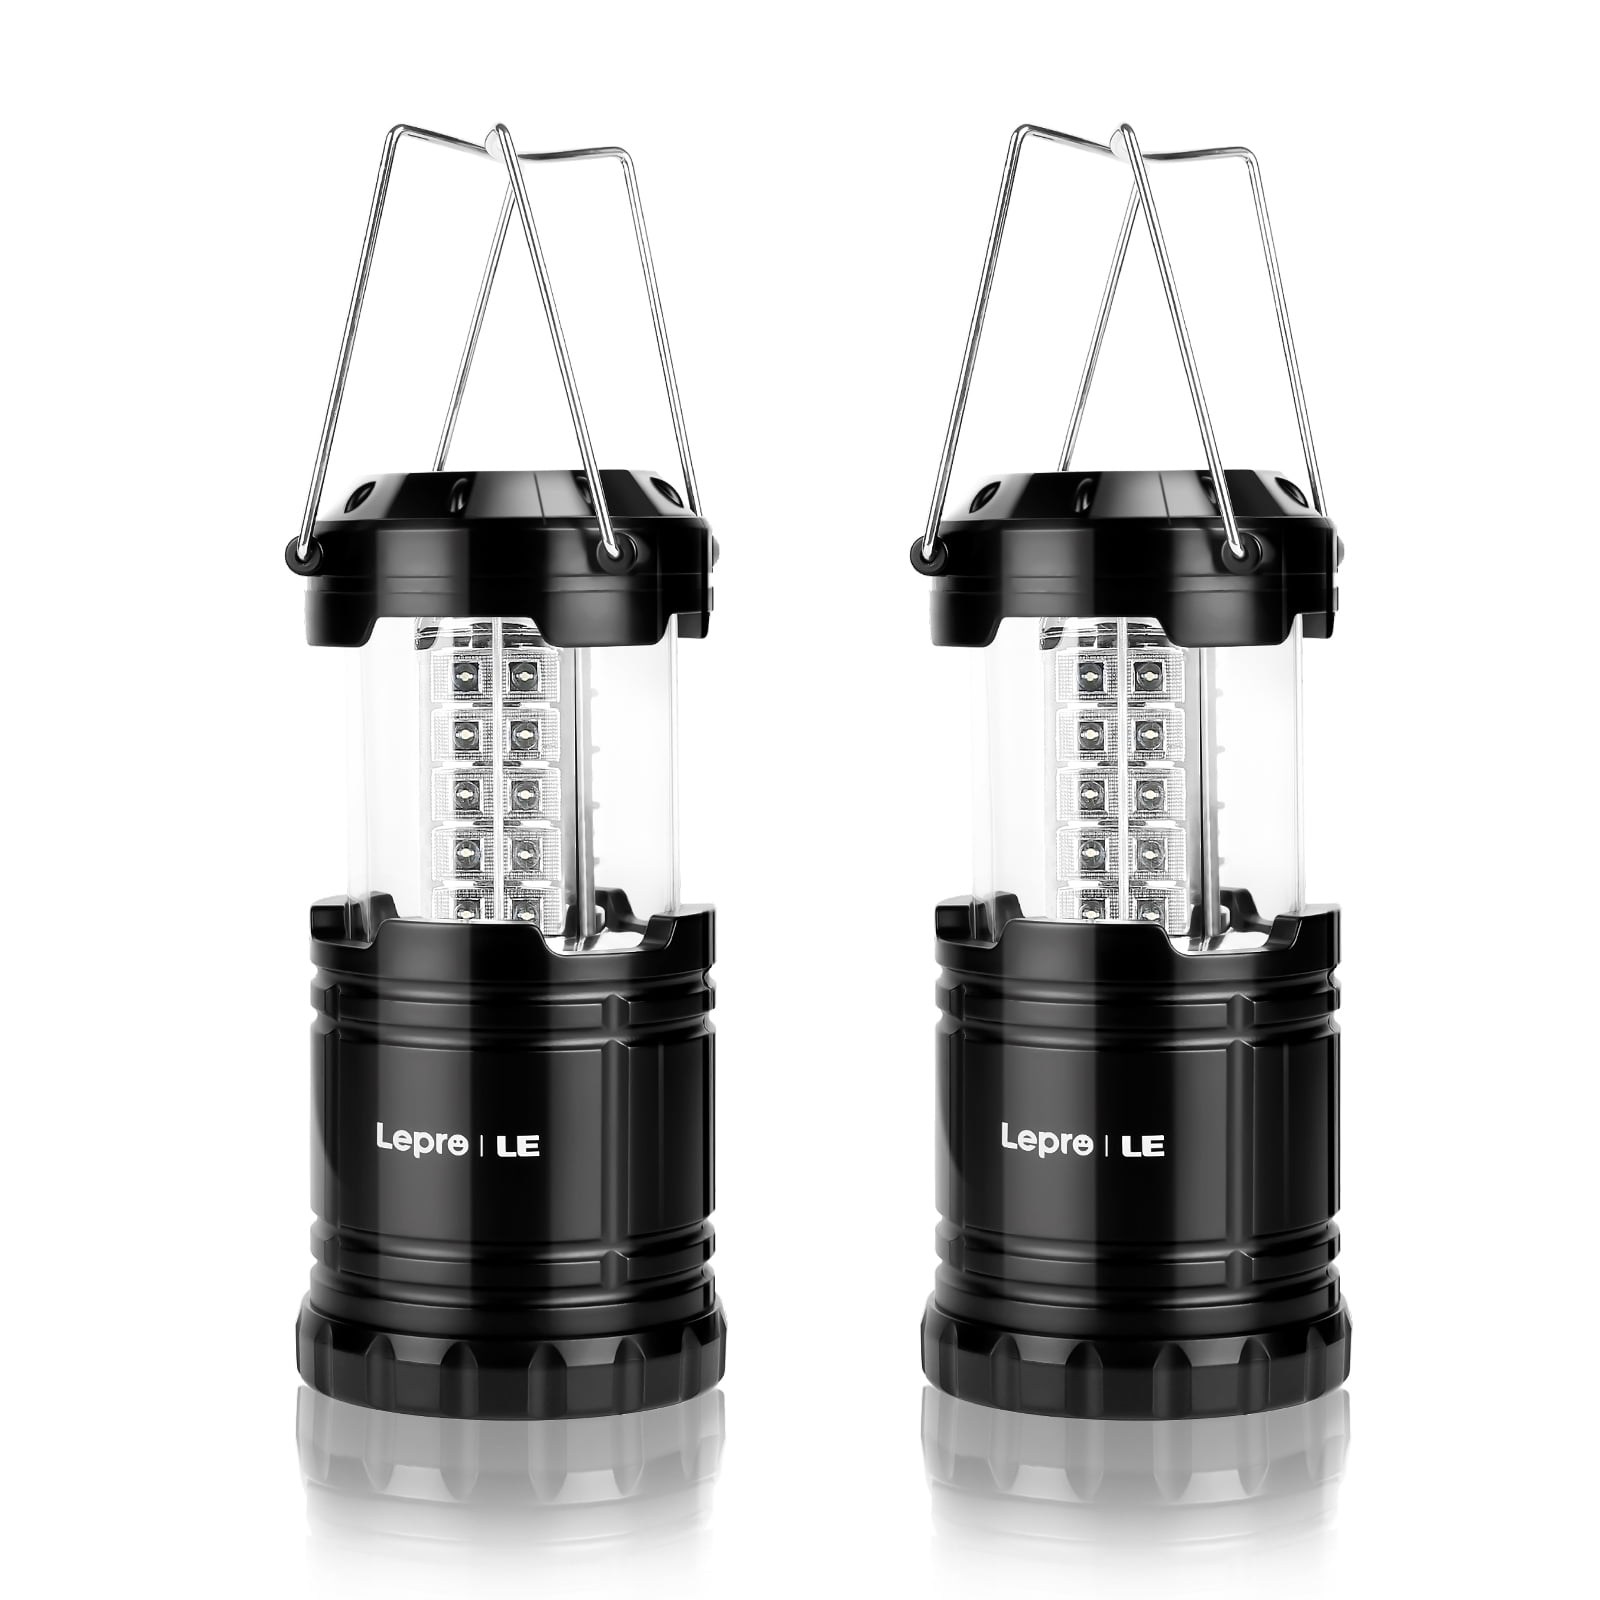 Lichamp LED Lanterns, 4 Pack Pop Up Lanterns for Power Outages, Bright  Battery Powered Hanging Lanterns